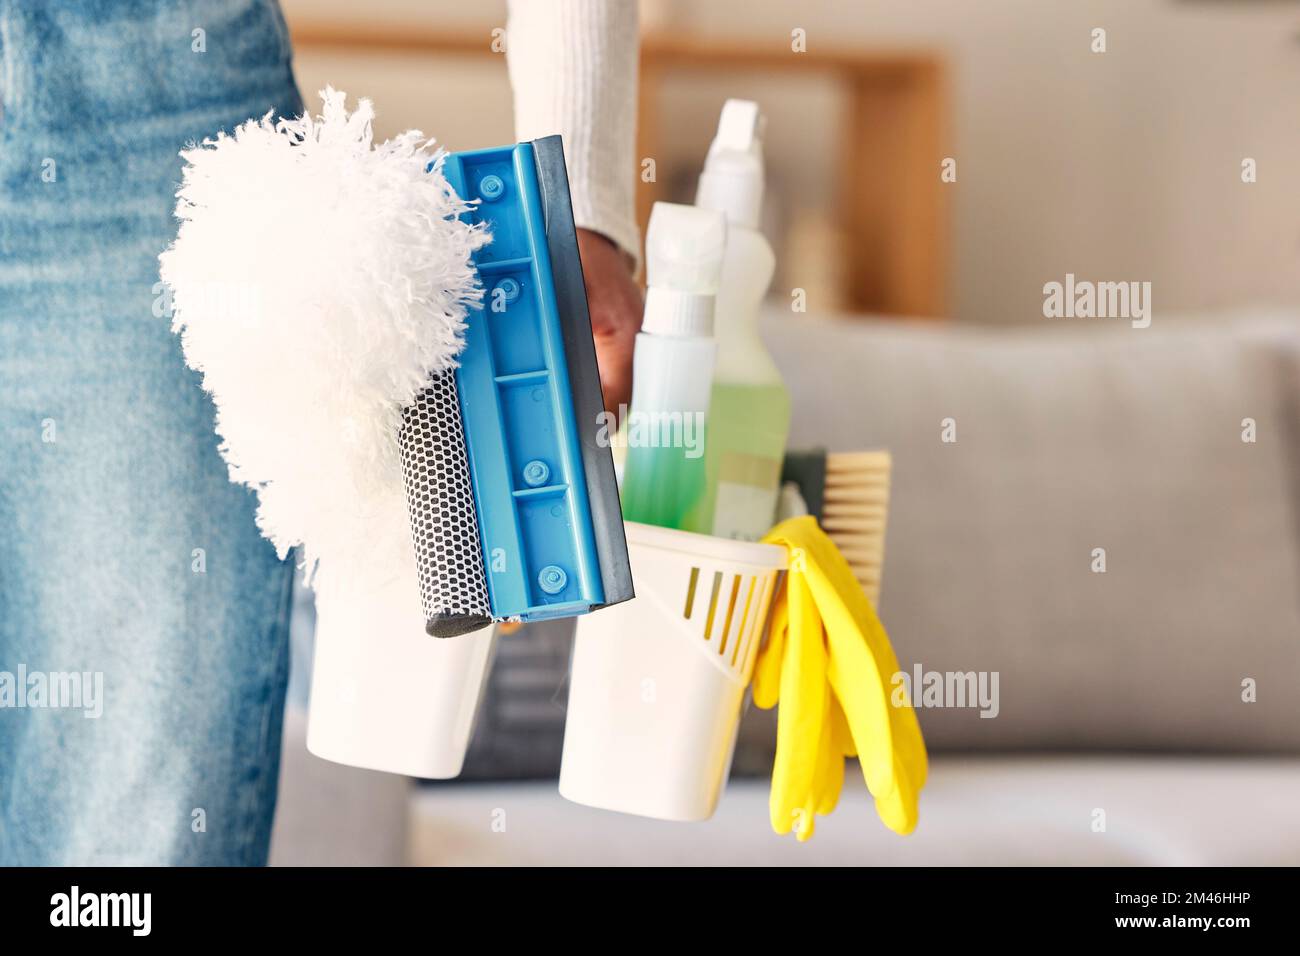 Cleaning, products and hand of cleaner with basket in home preparing for cleaning service. Spring cleaning, hygiene and black woman with cleaning Stock Photo